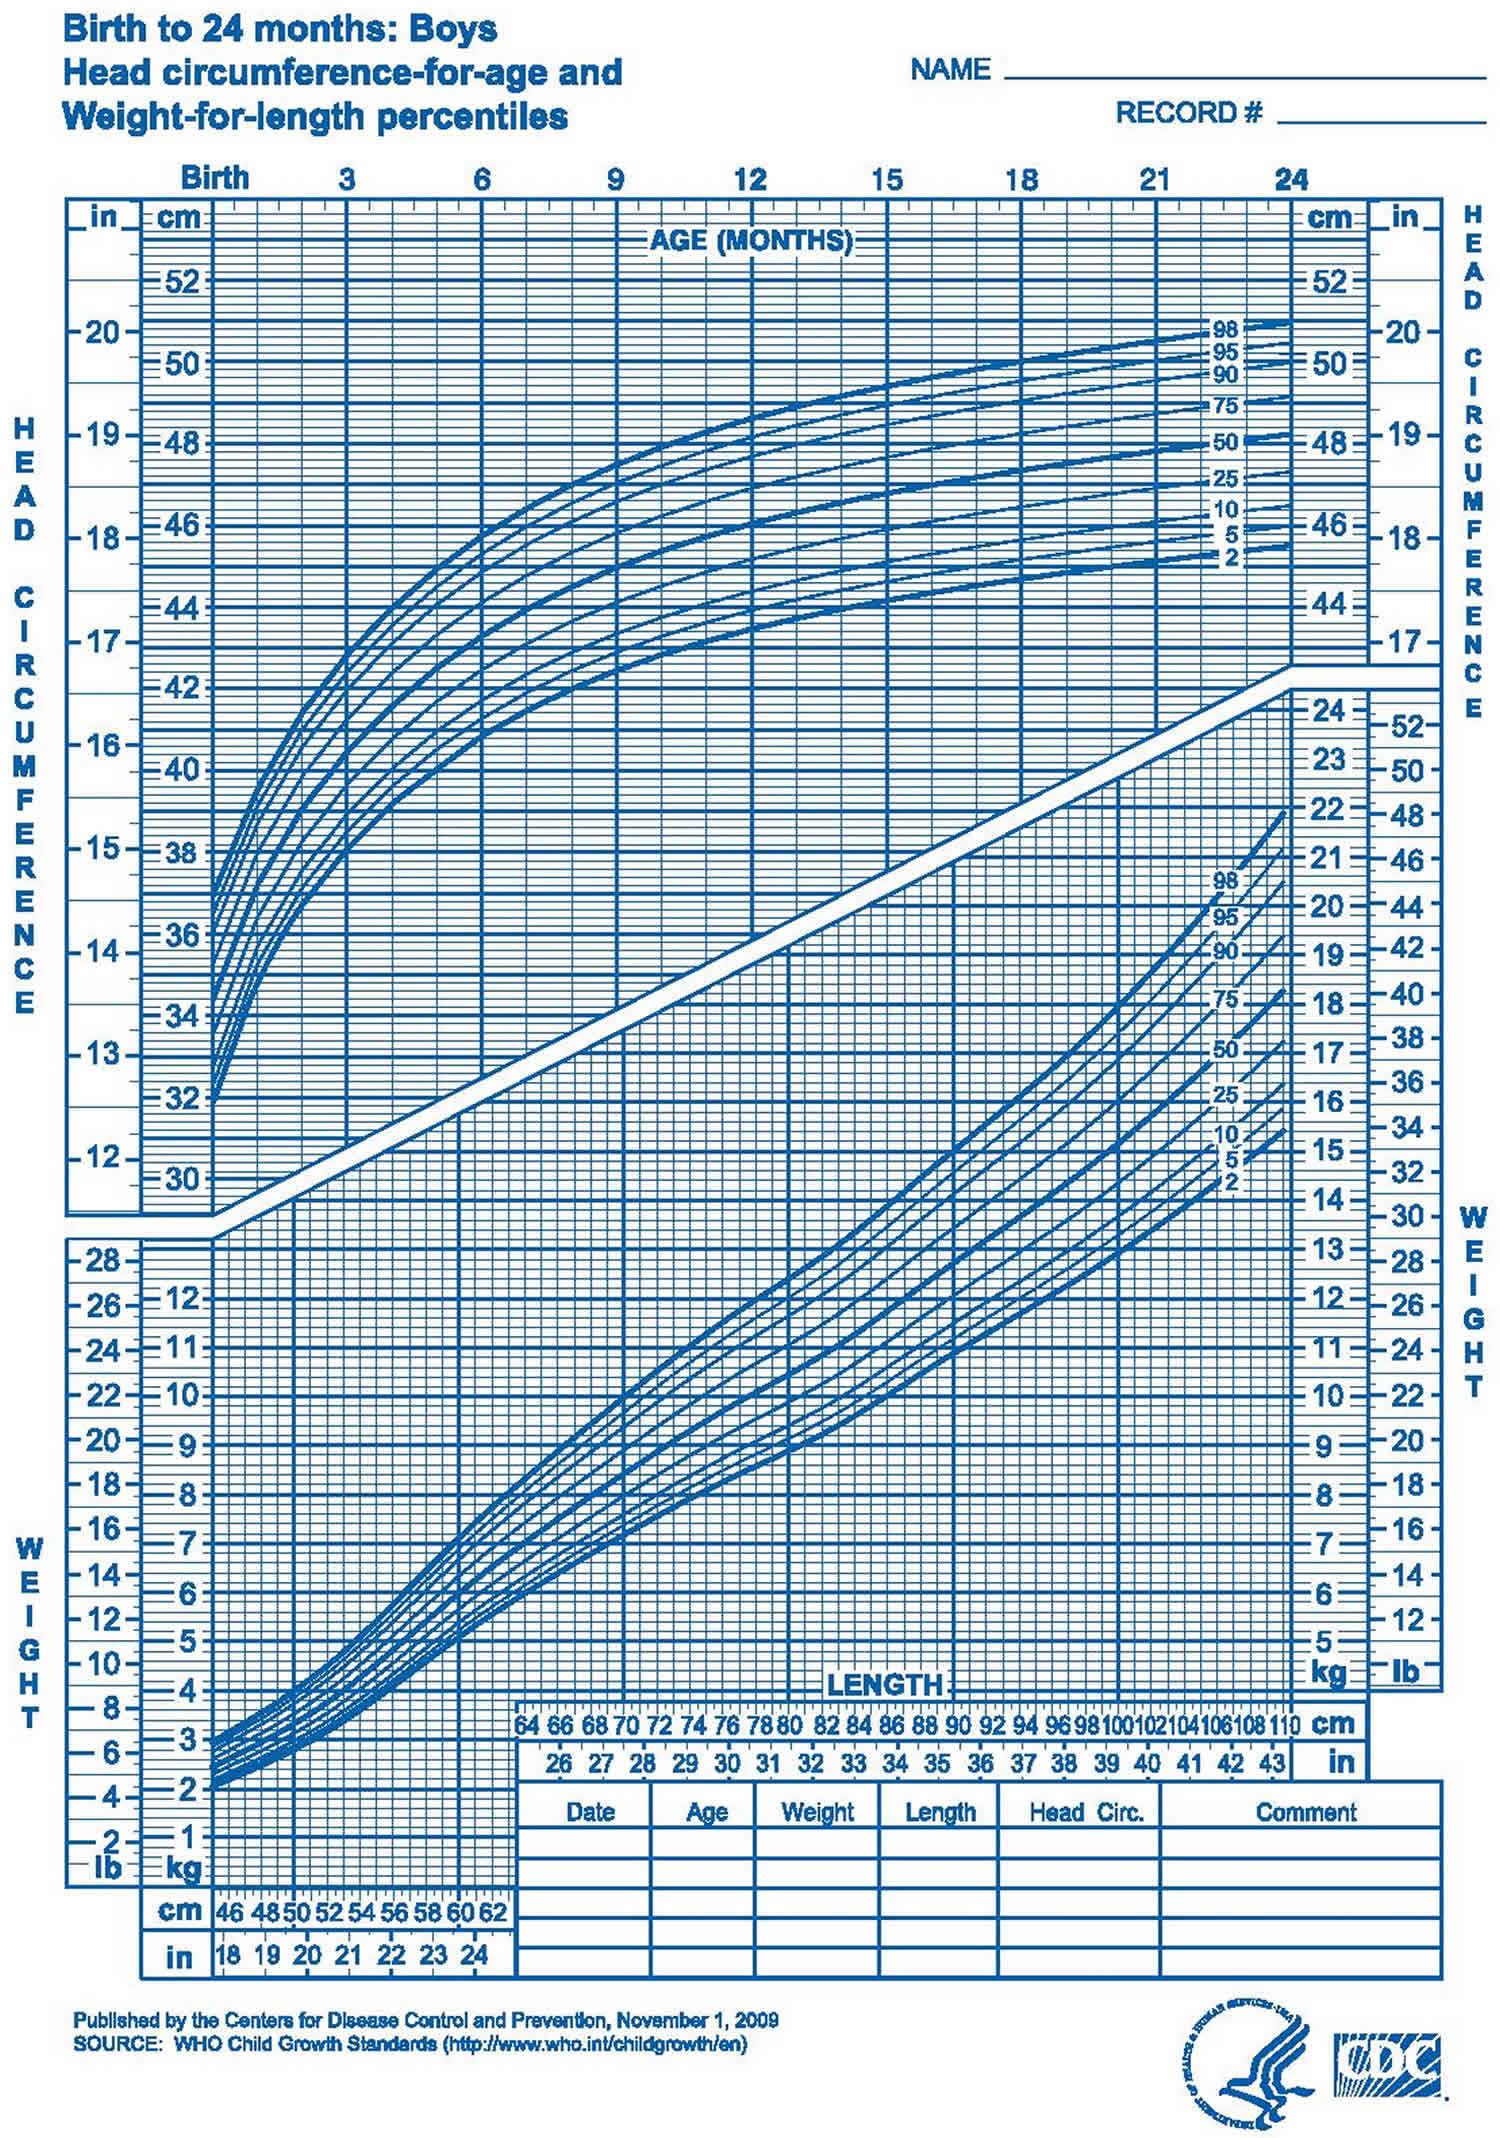 Boys-Growth-Chart-Birth-to-2-Years-Head-circumference-and-weight-for-length